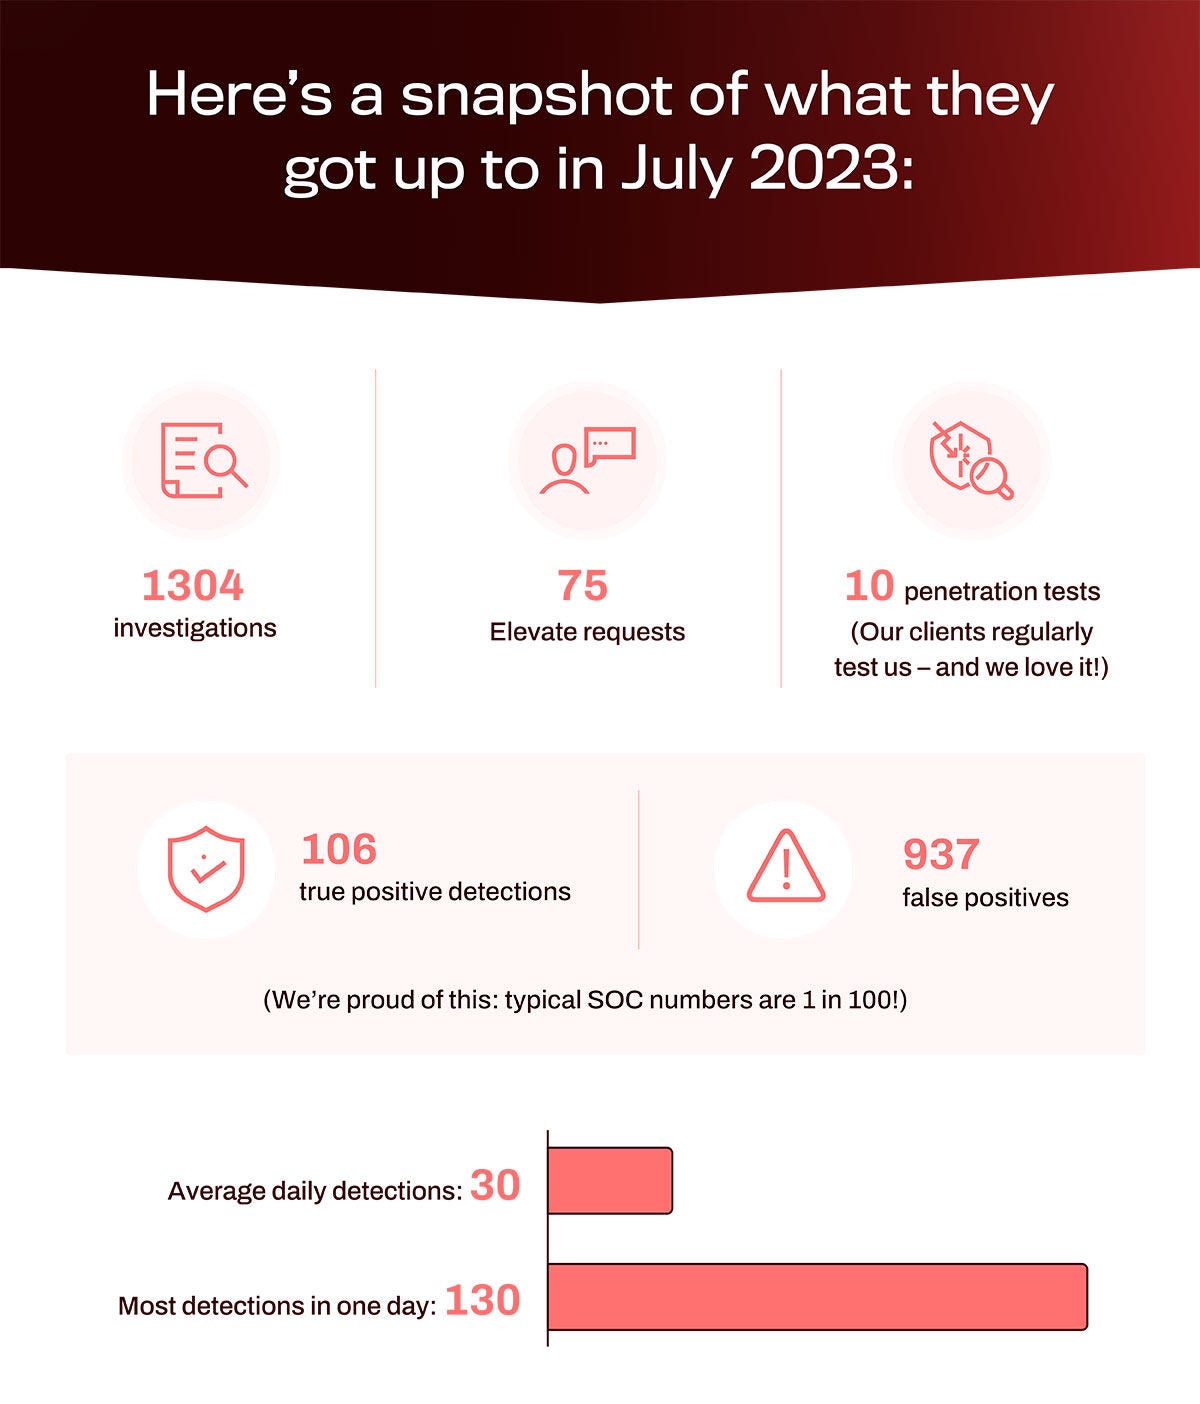 Here's a snapshot of what they got up to in July 2023